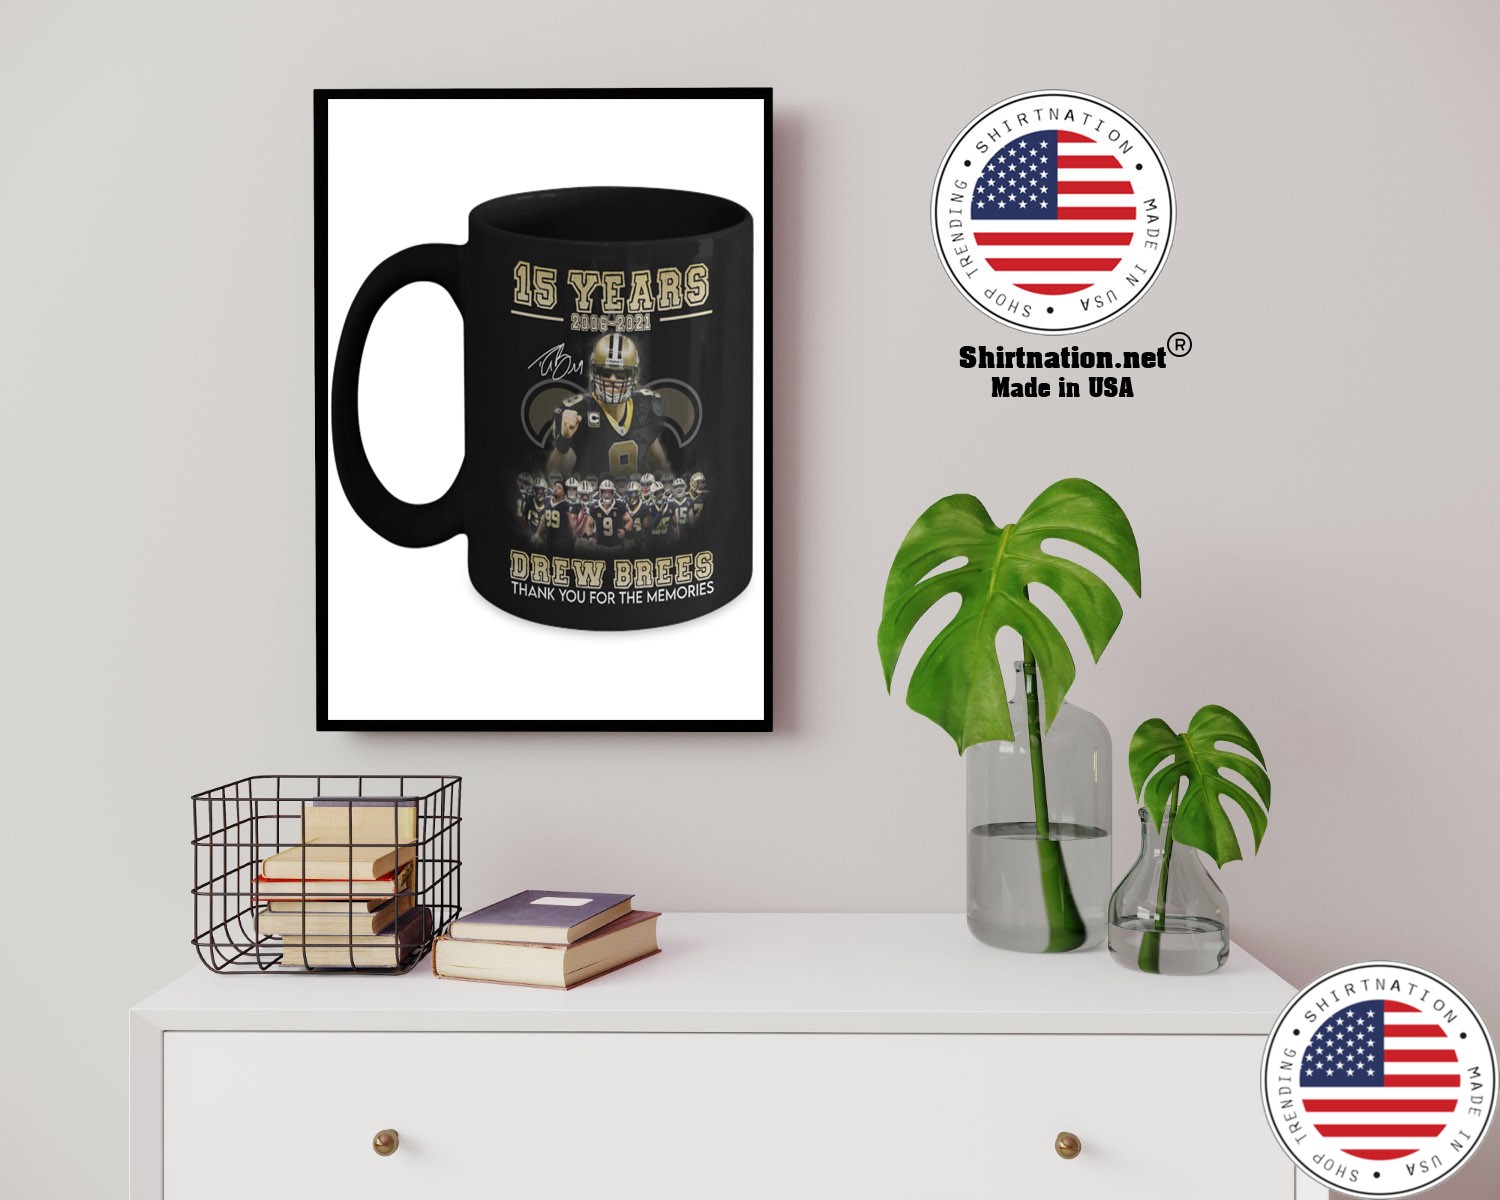 15 years 2006 2021 drew brees thank you for the memories mug 14